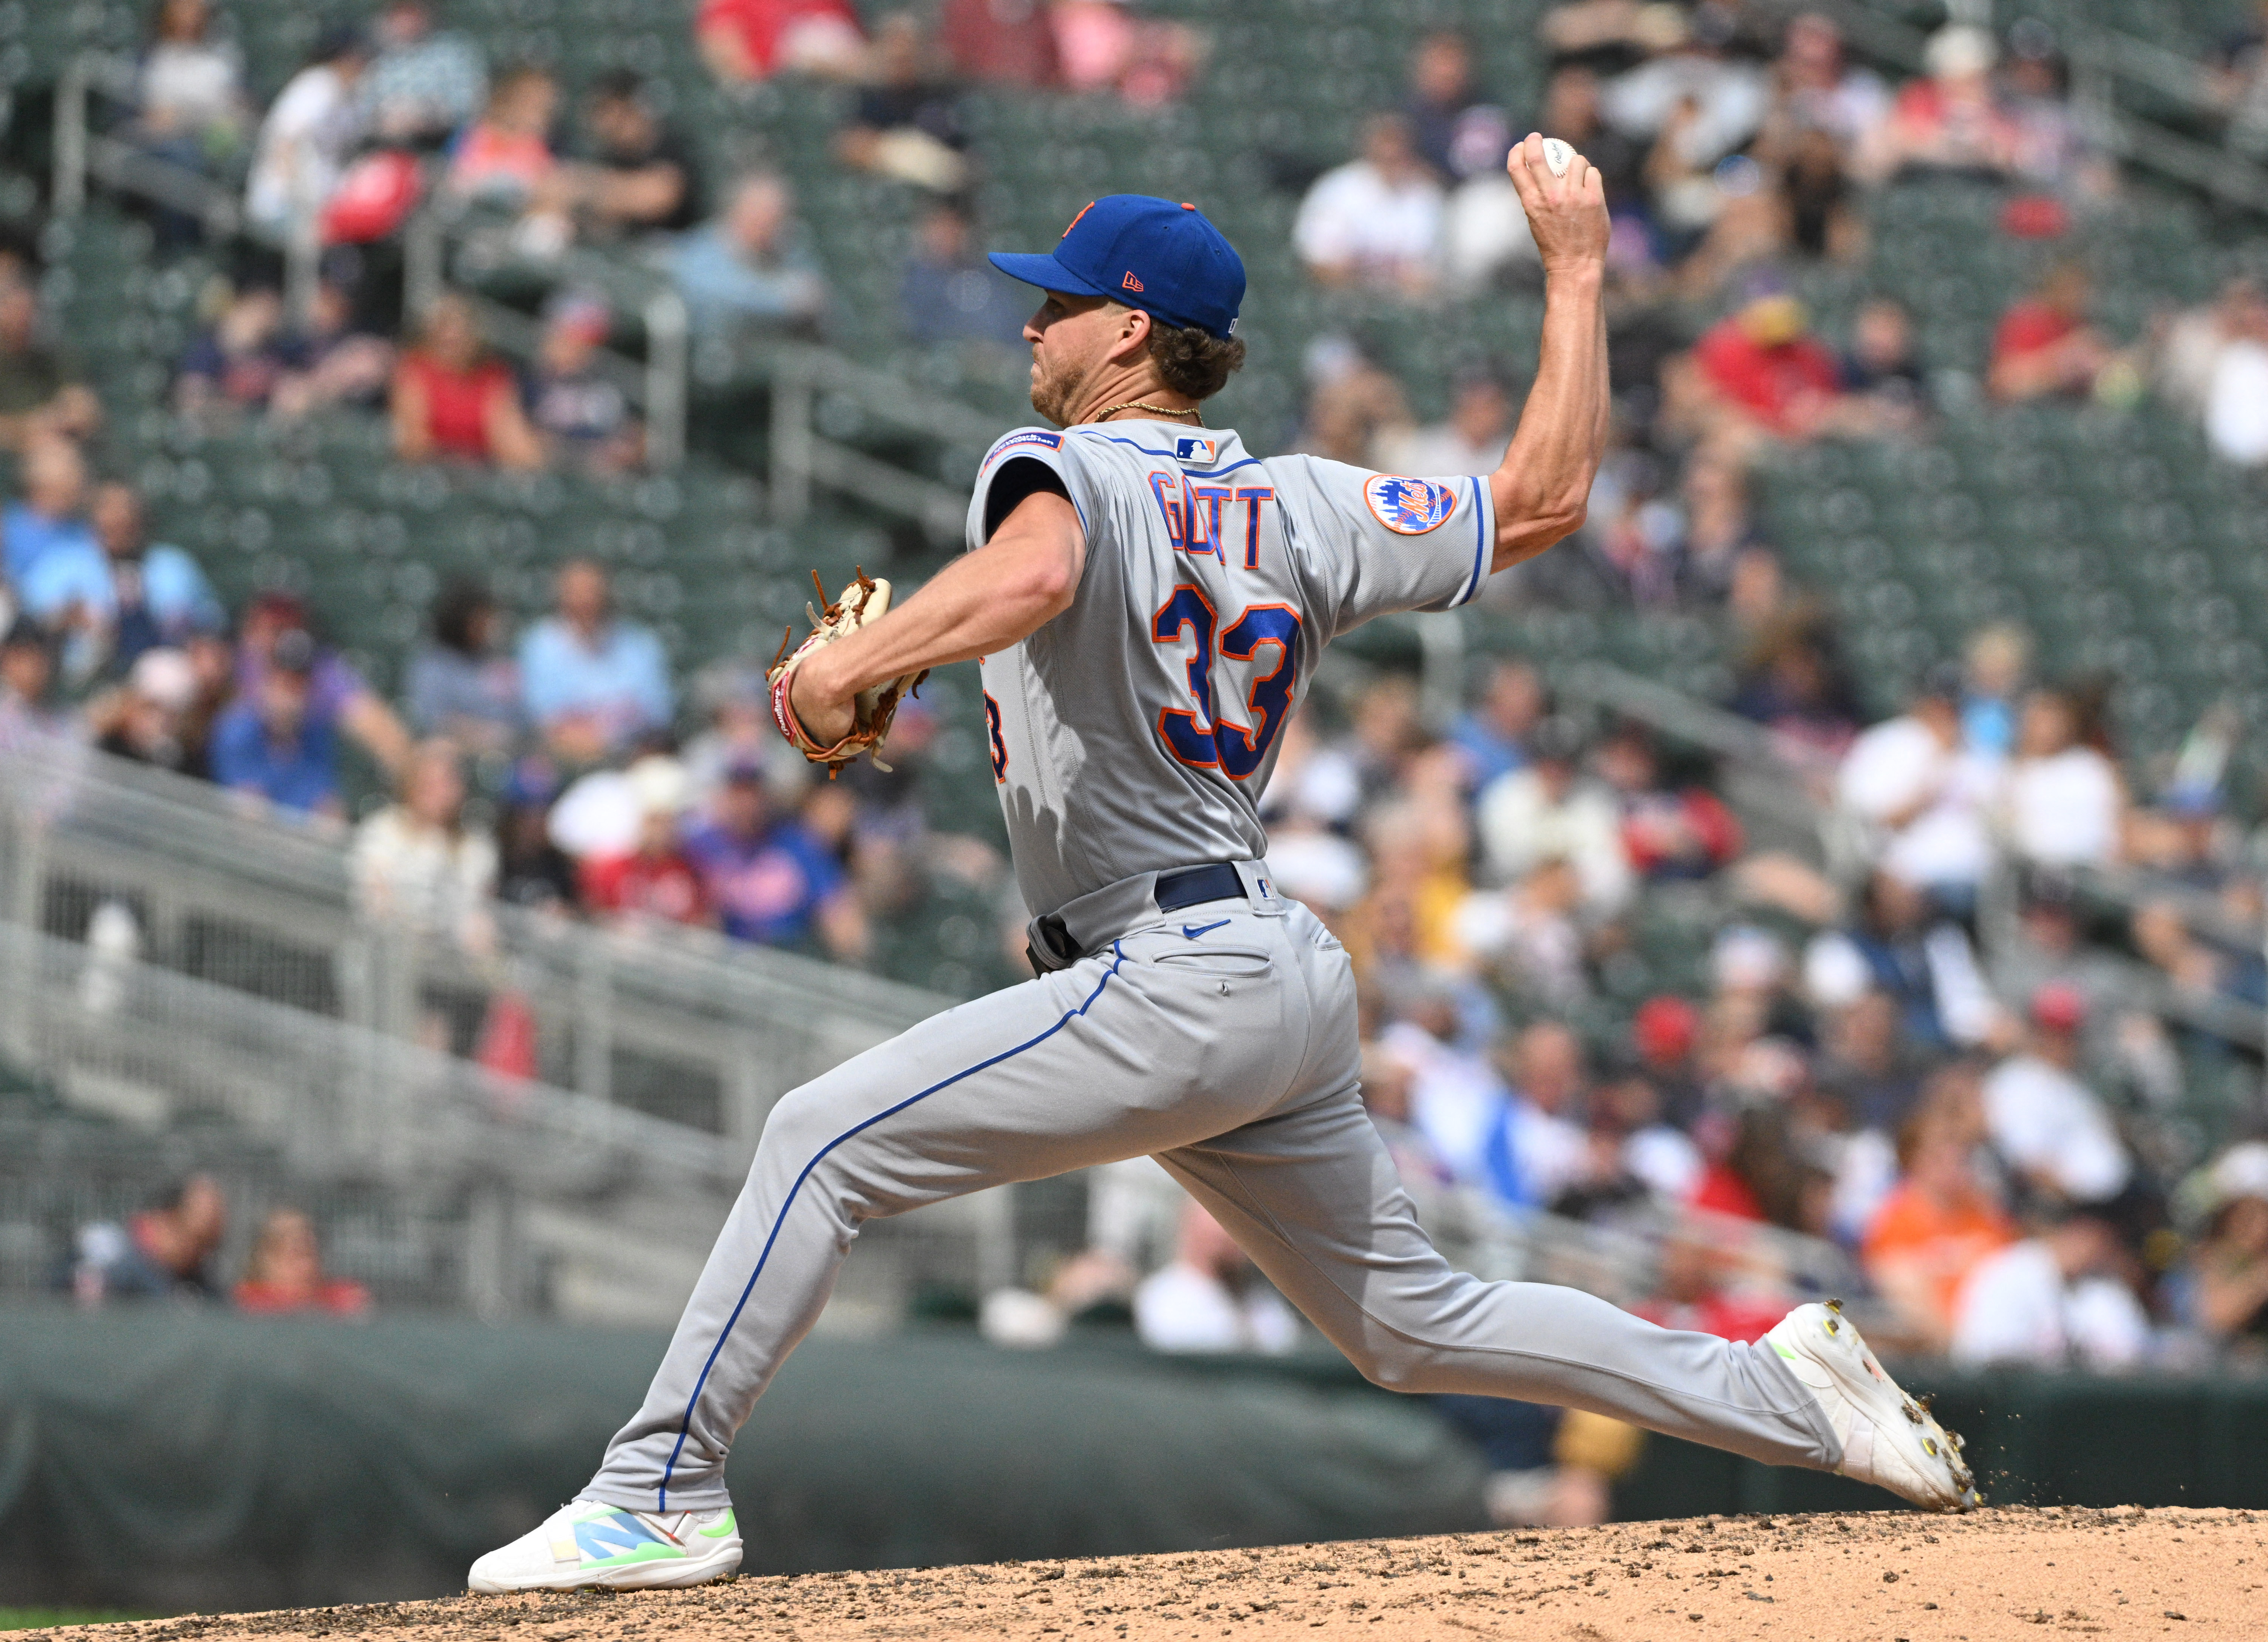 5 Mets pitchers combine for shutout of Twins